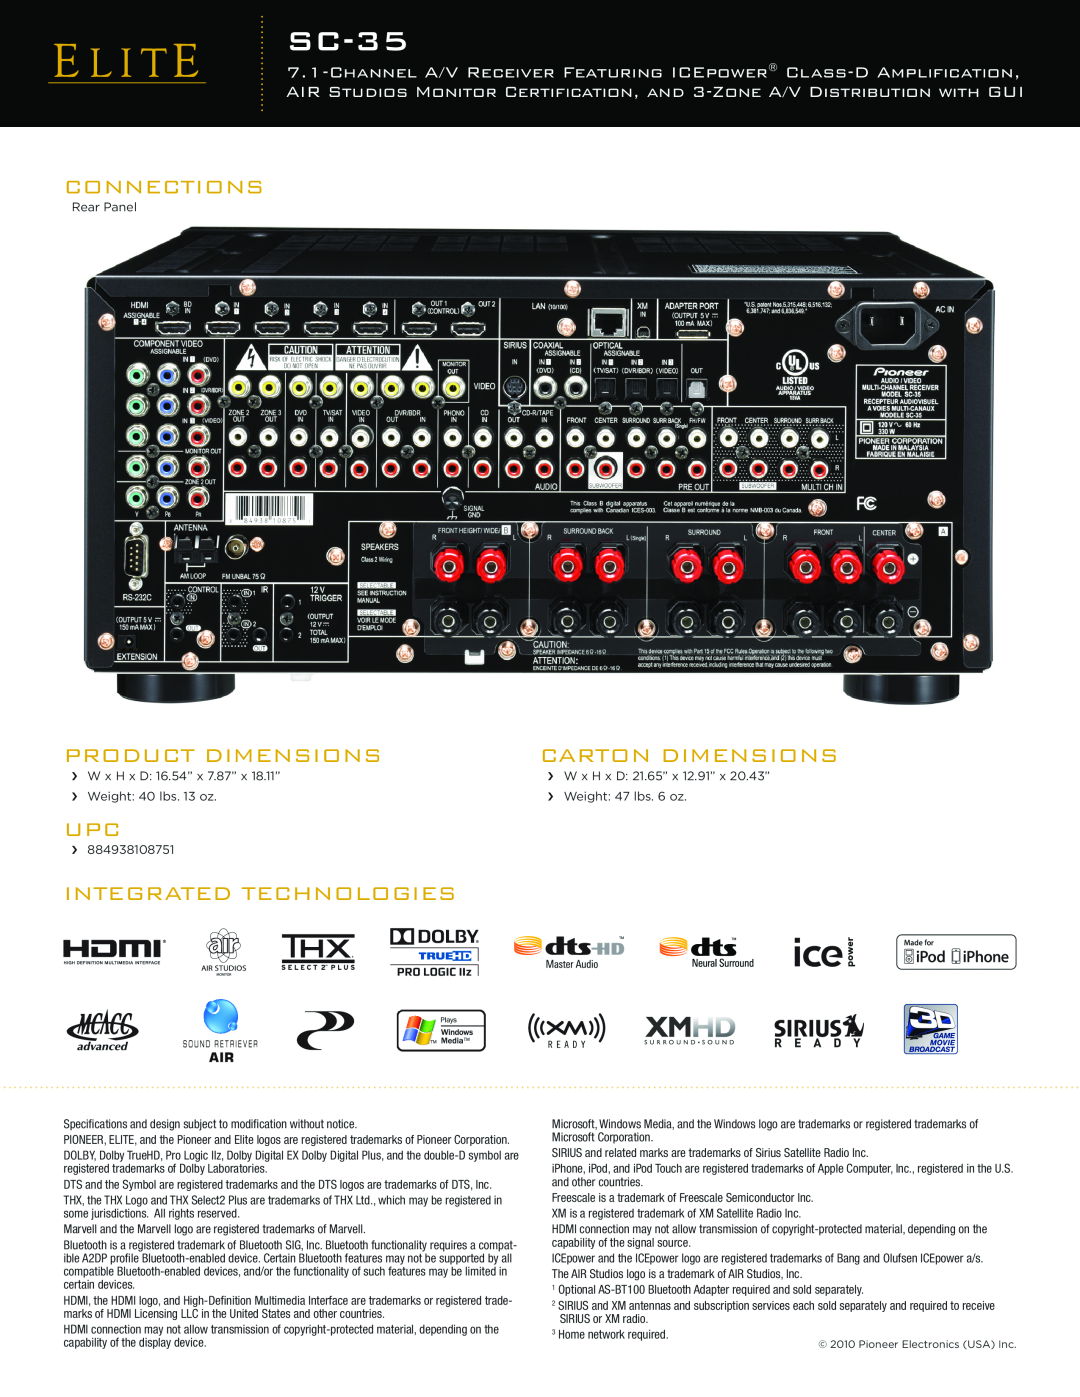 Pioneer SC-35 manual Connections, Product Dimensions, Carton Dimensions, Integrated Technologies 